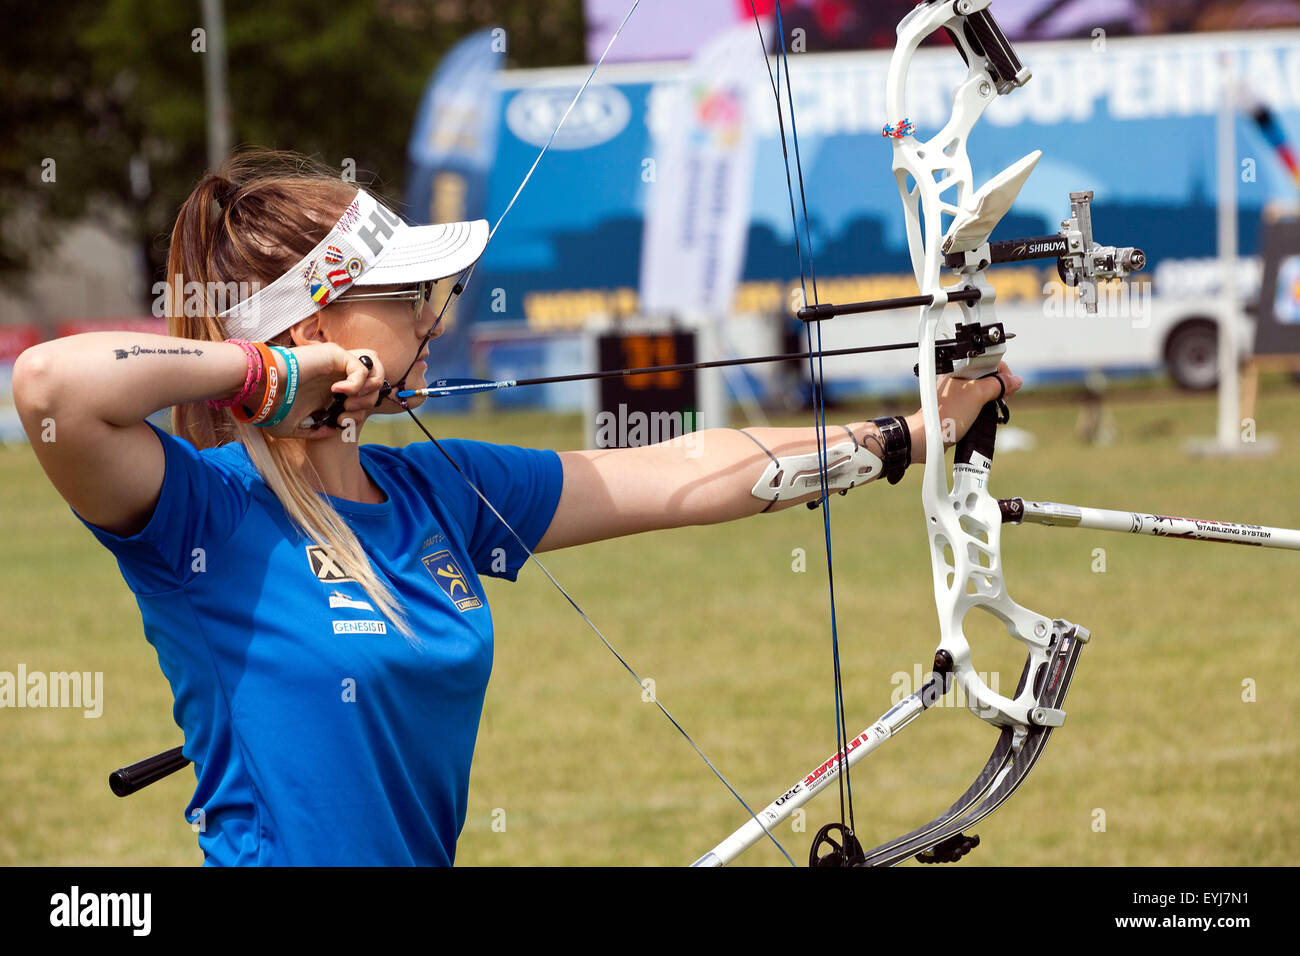 Copenhagen, Denmark, July 30th, 2015: Swedish archer Helen Forsberg competes in the World Archery Championships in Copenhagen during Thursday's individual matches  in compound bow. Credit:  OJPHOTOS/Alamy Live News Stock Photo